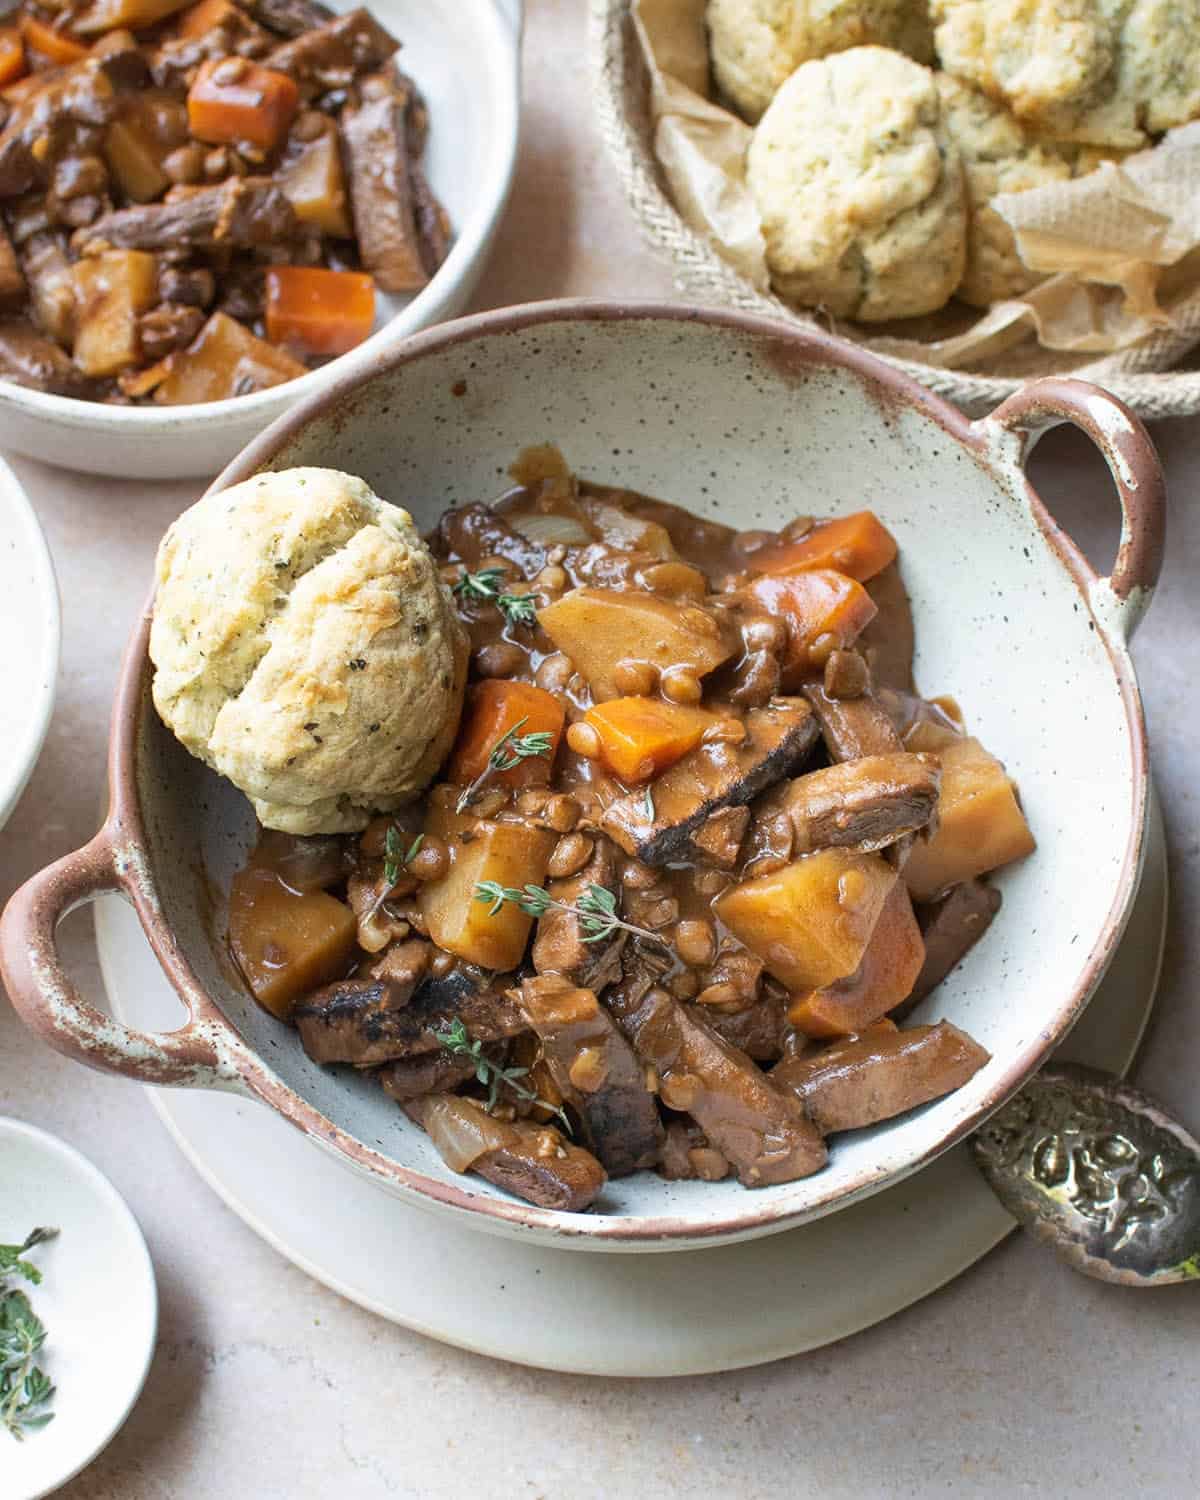 Vegan beef stew with vegetables and dumplings, with small dishes in the background